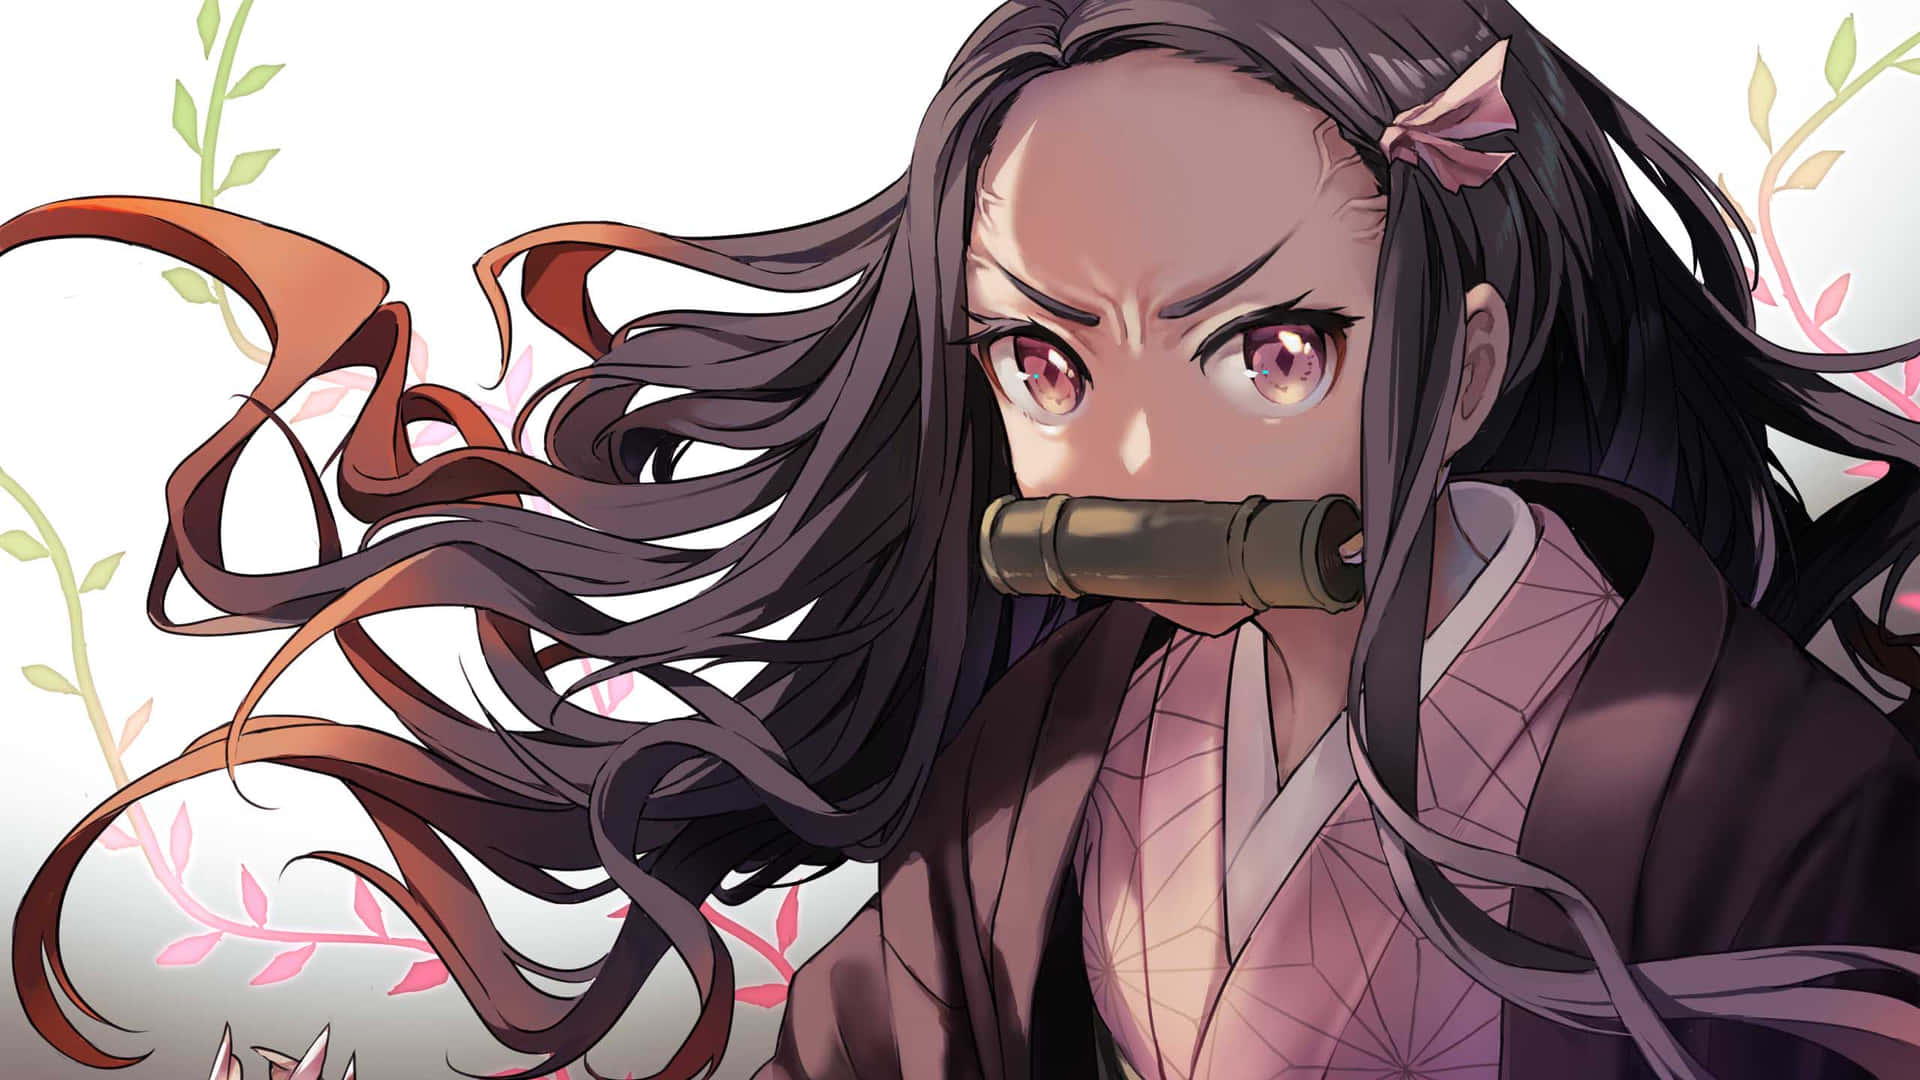 Join Nezuko in her mission to save humanity from powerful demons